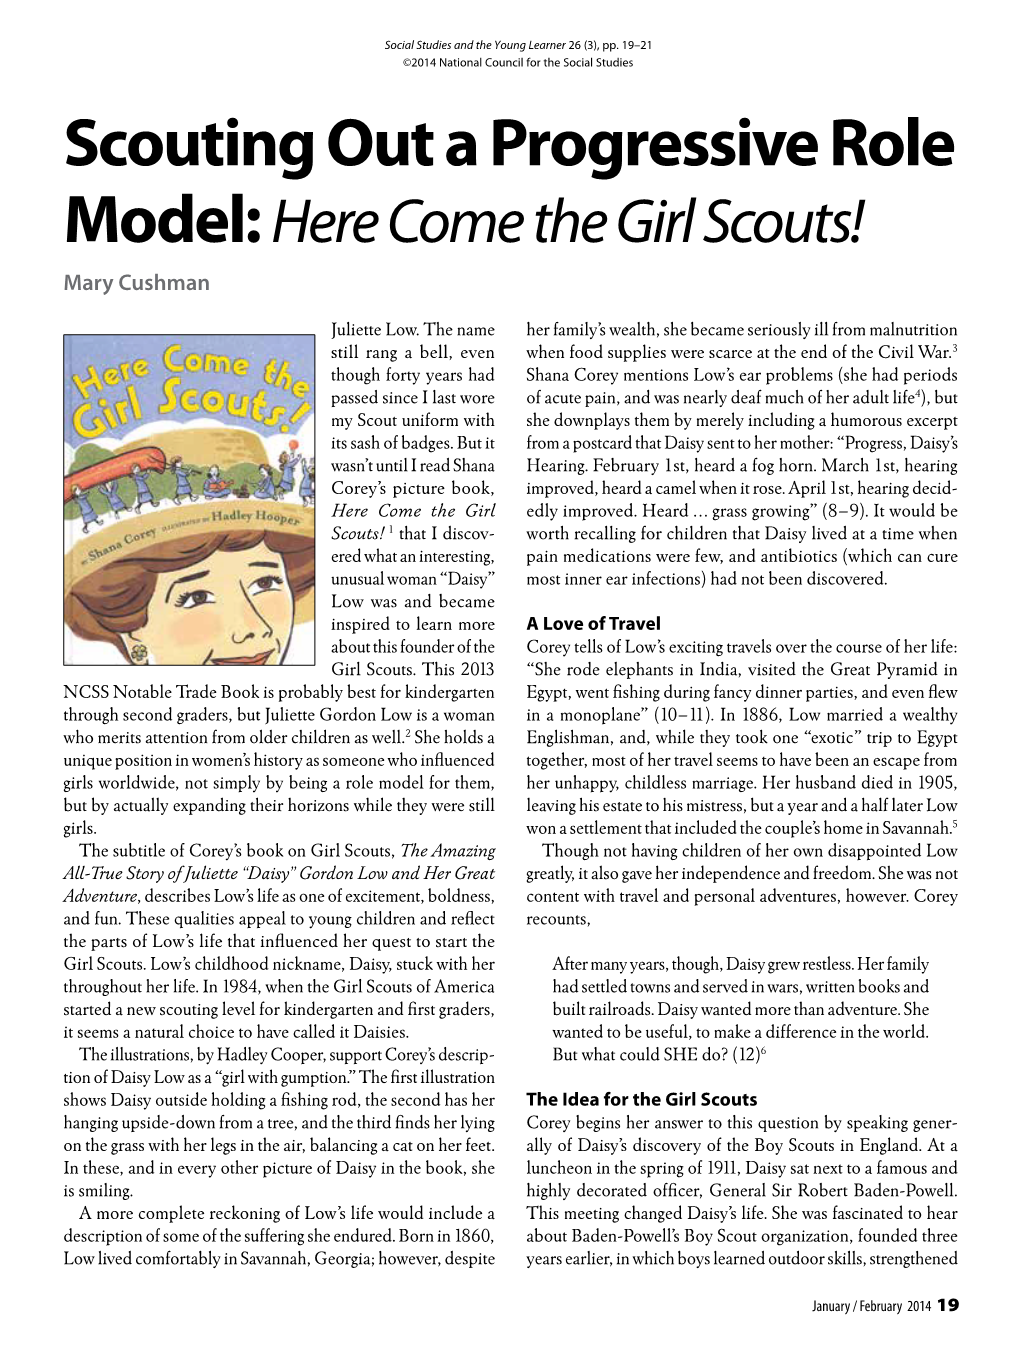 Scouting out a Progressive Role Model: Here Come the Girl Scouts! Mary Cushman